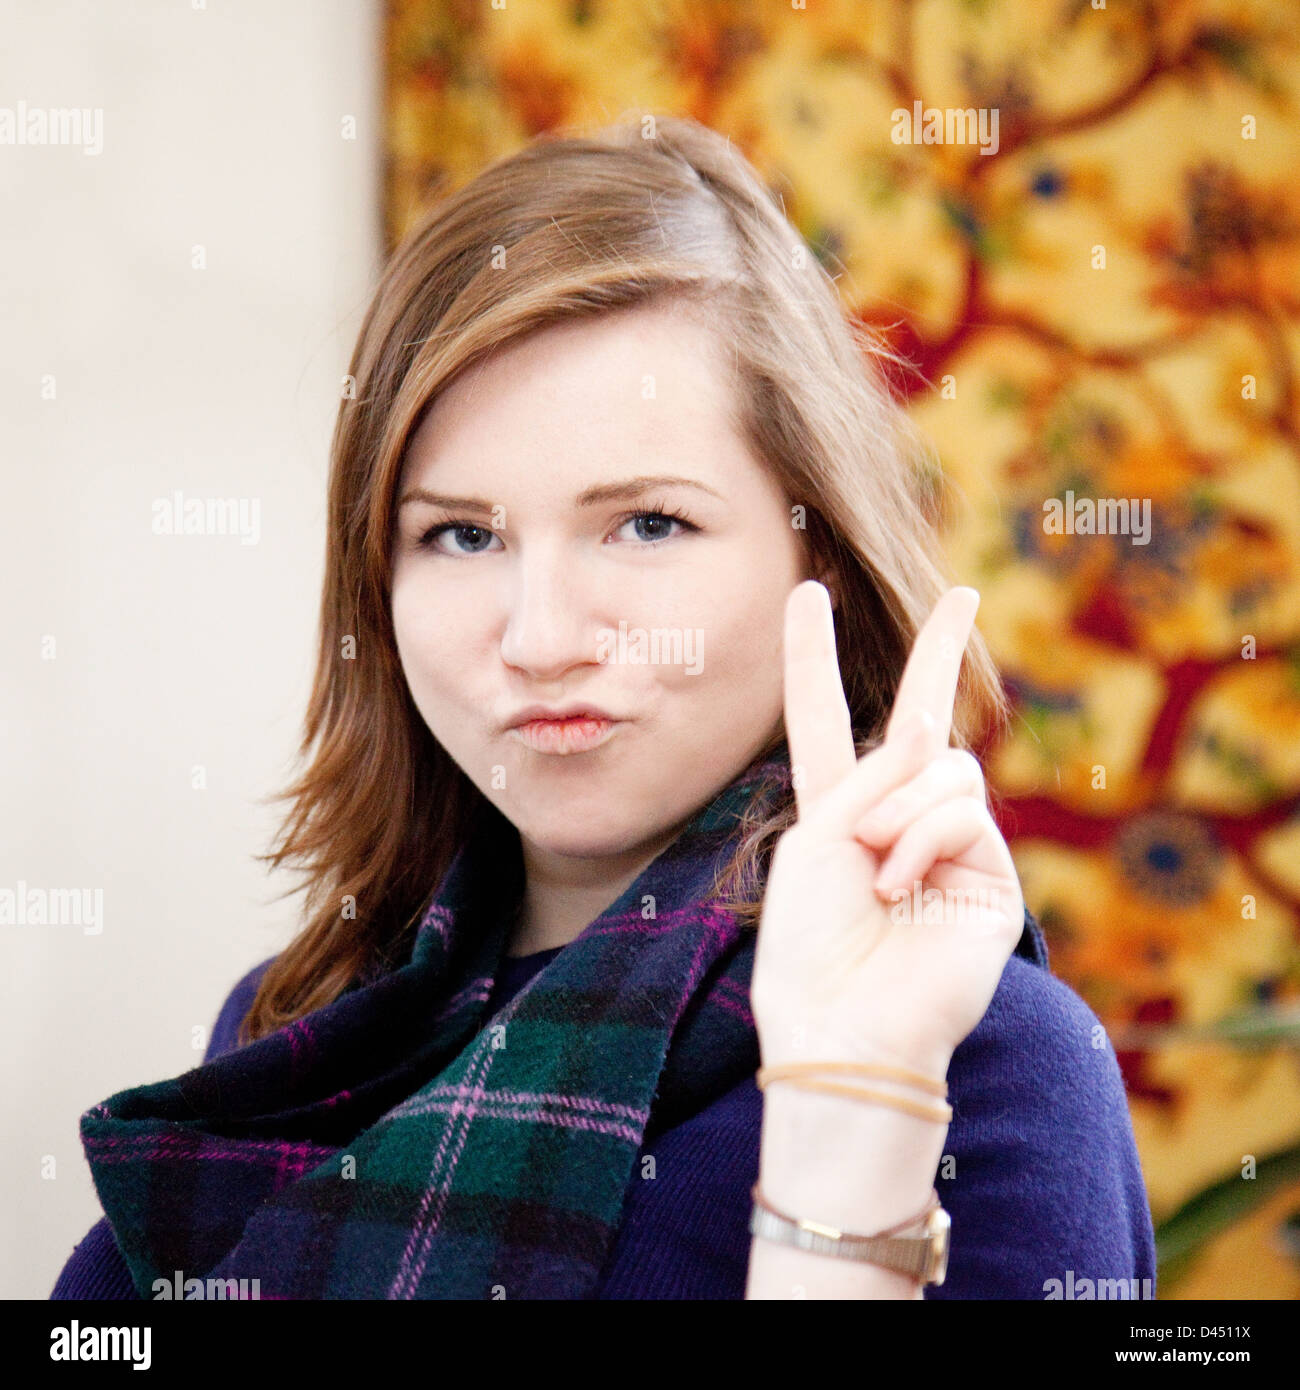 Attractive caucasian brunette young woman age 19-21 years, giving a V sign Stock Photo